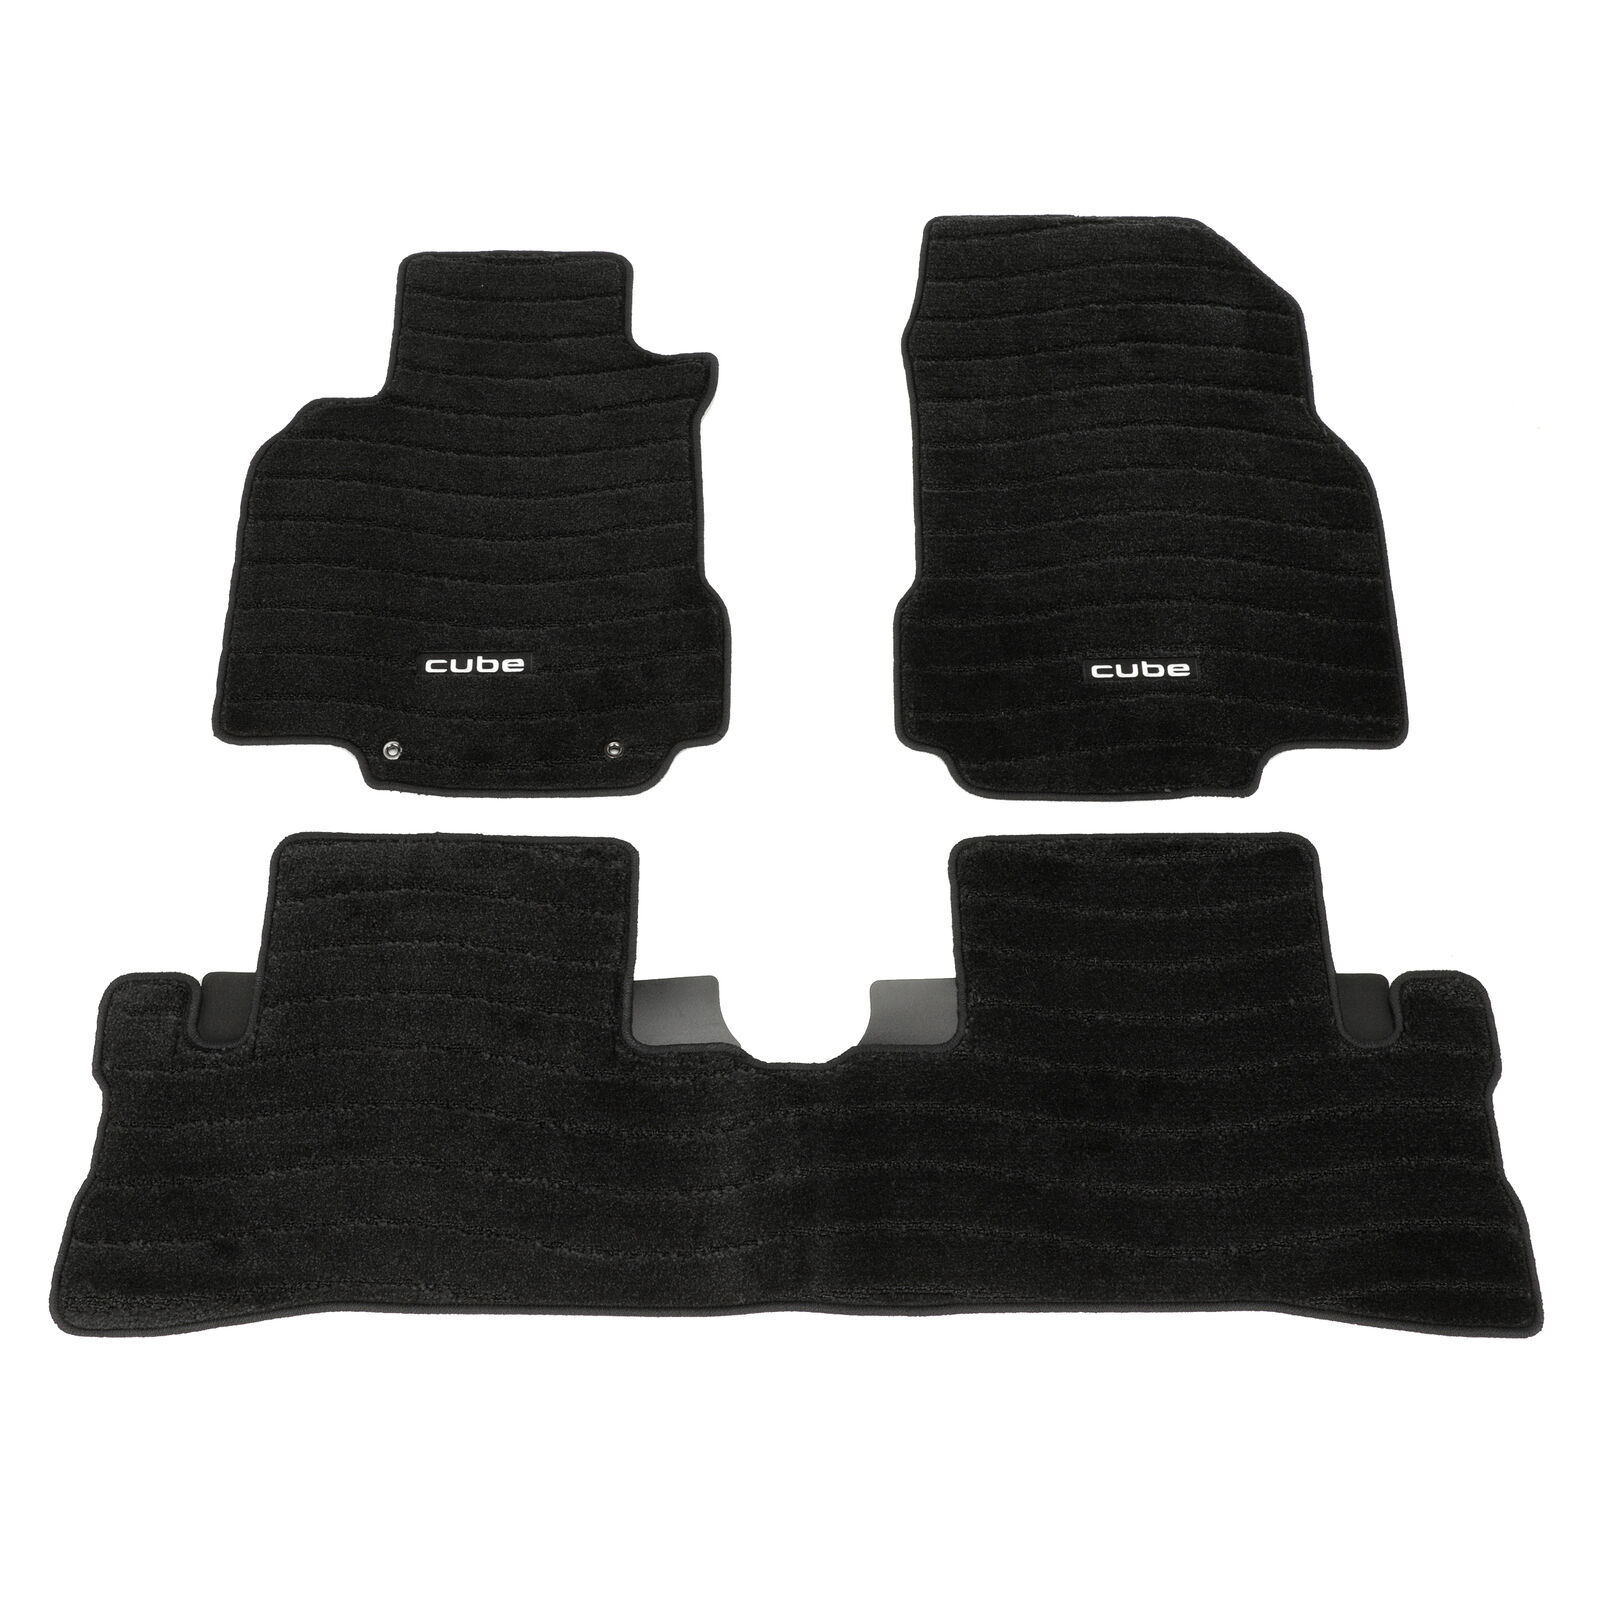 2009-2014 Nissan Cube Black Carpeted Floor Mats Front & Rear Set Of 3 OEM NEW